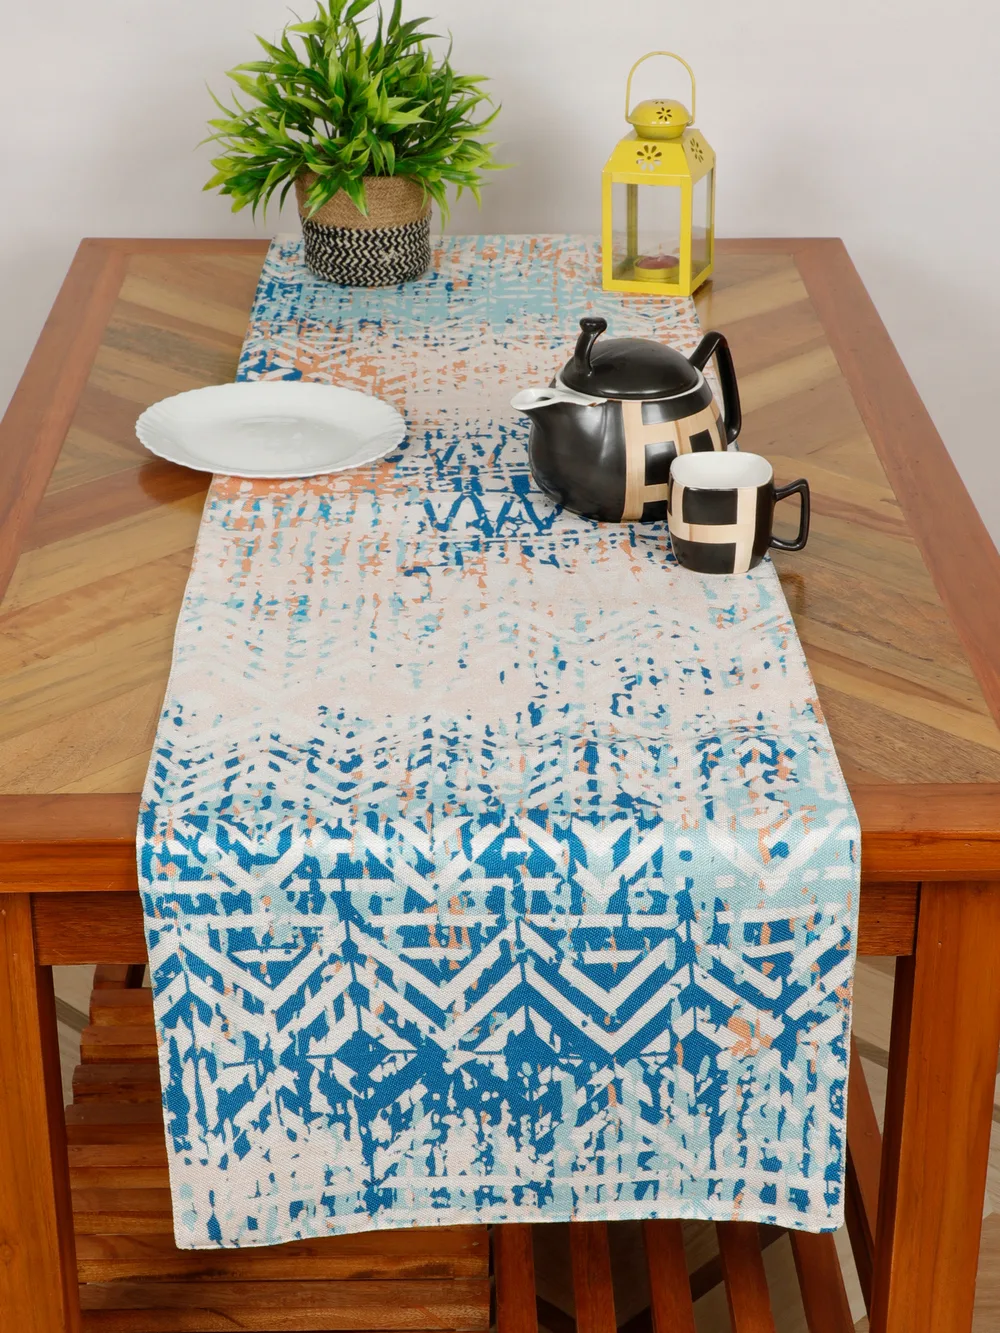 Cotton polyester printed table runner, triangle, square, wave, 54x14, white, blue, mustard